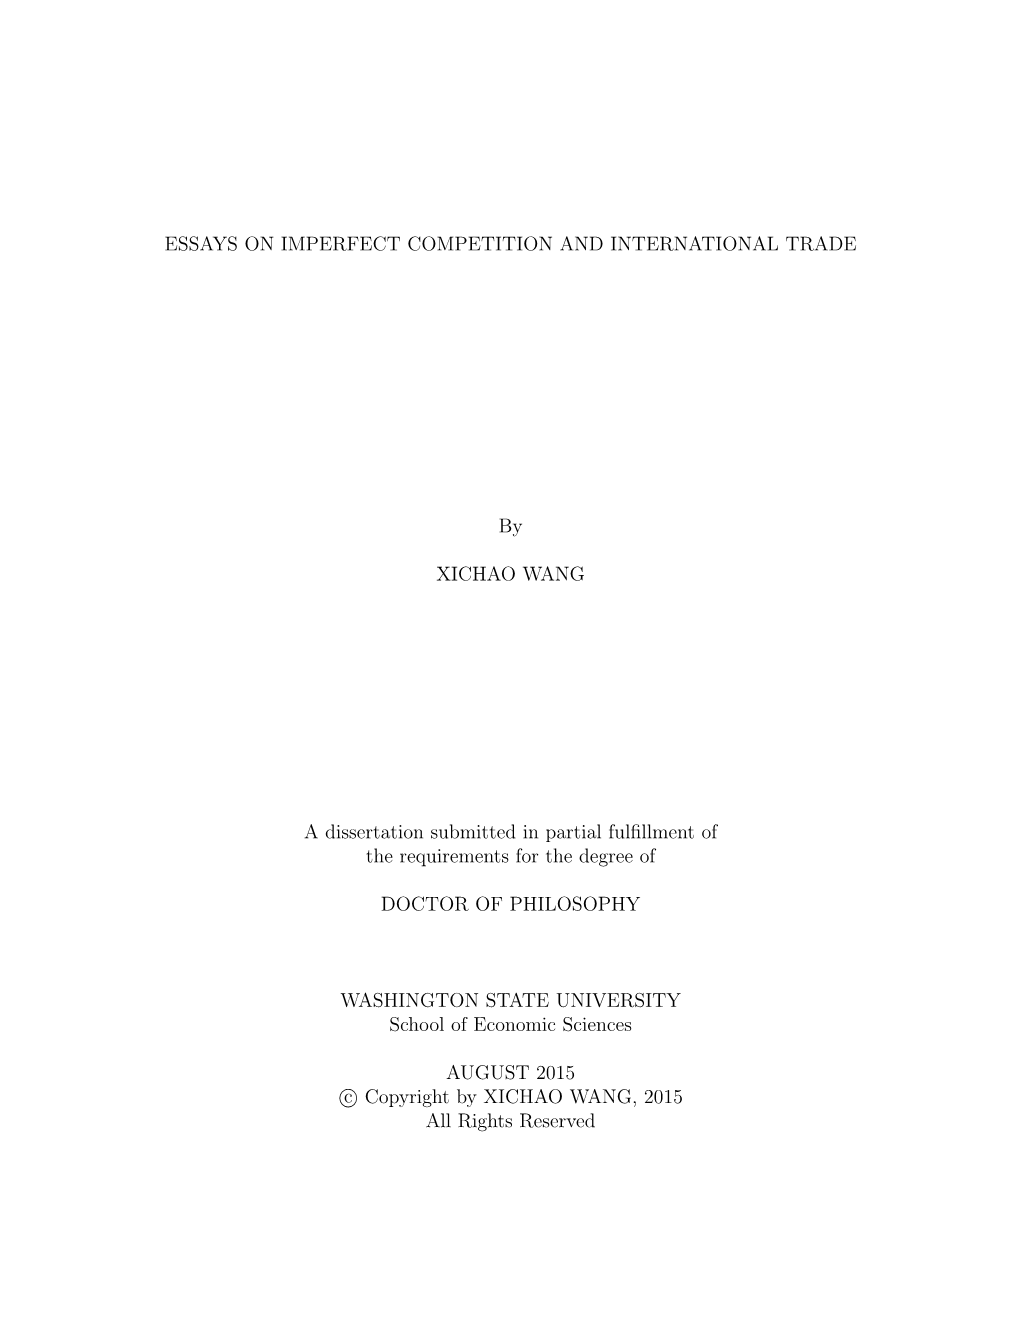 Essays on Imperfect Competition and International Trade